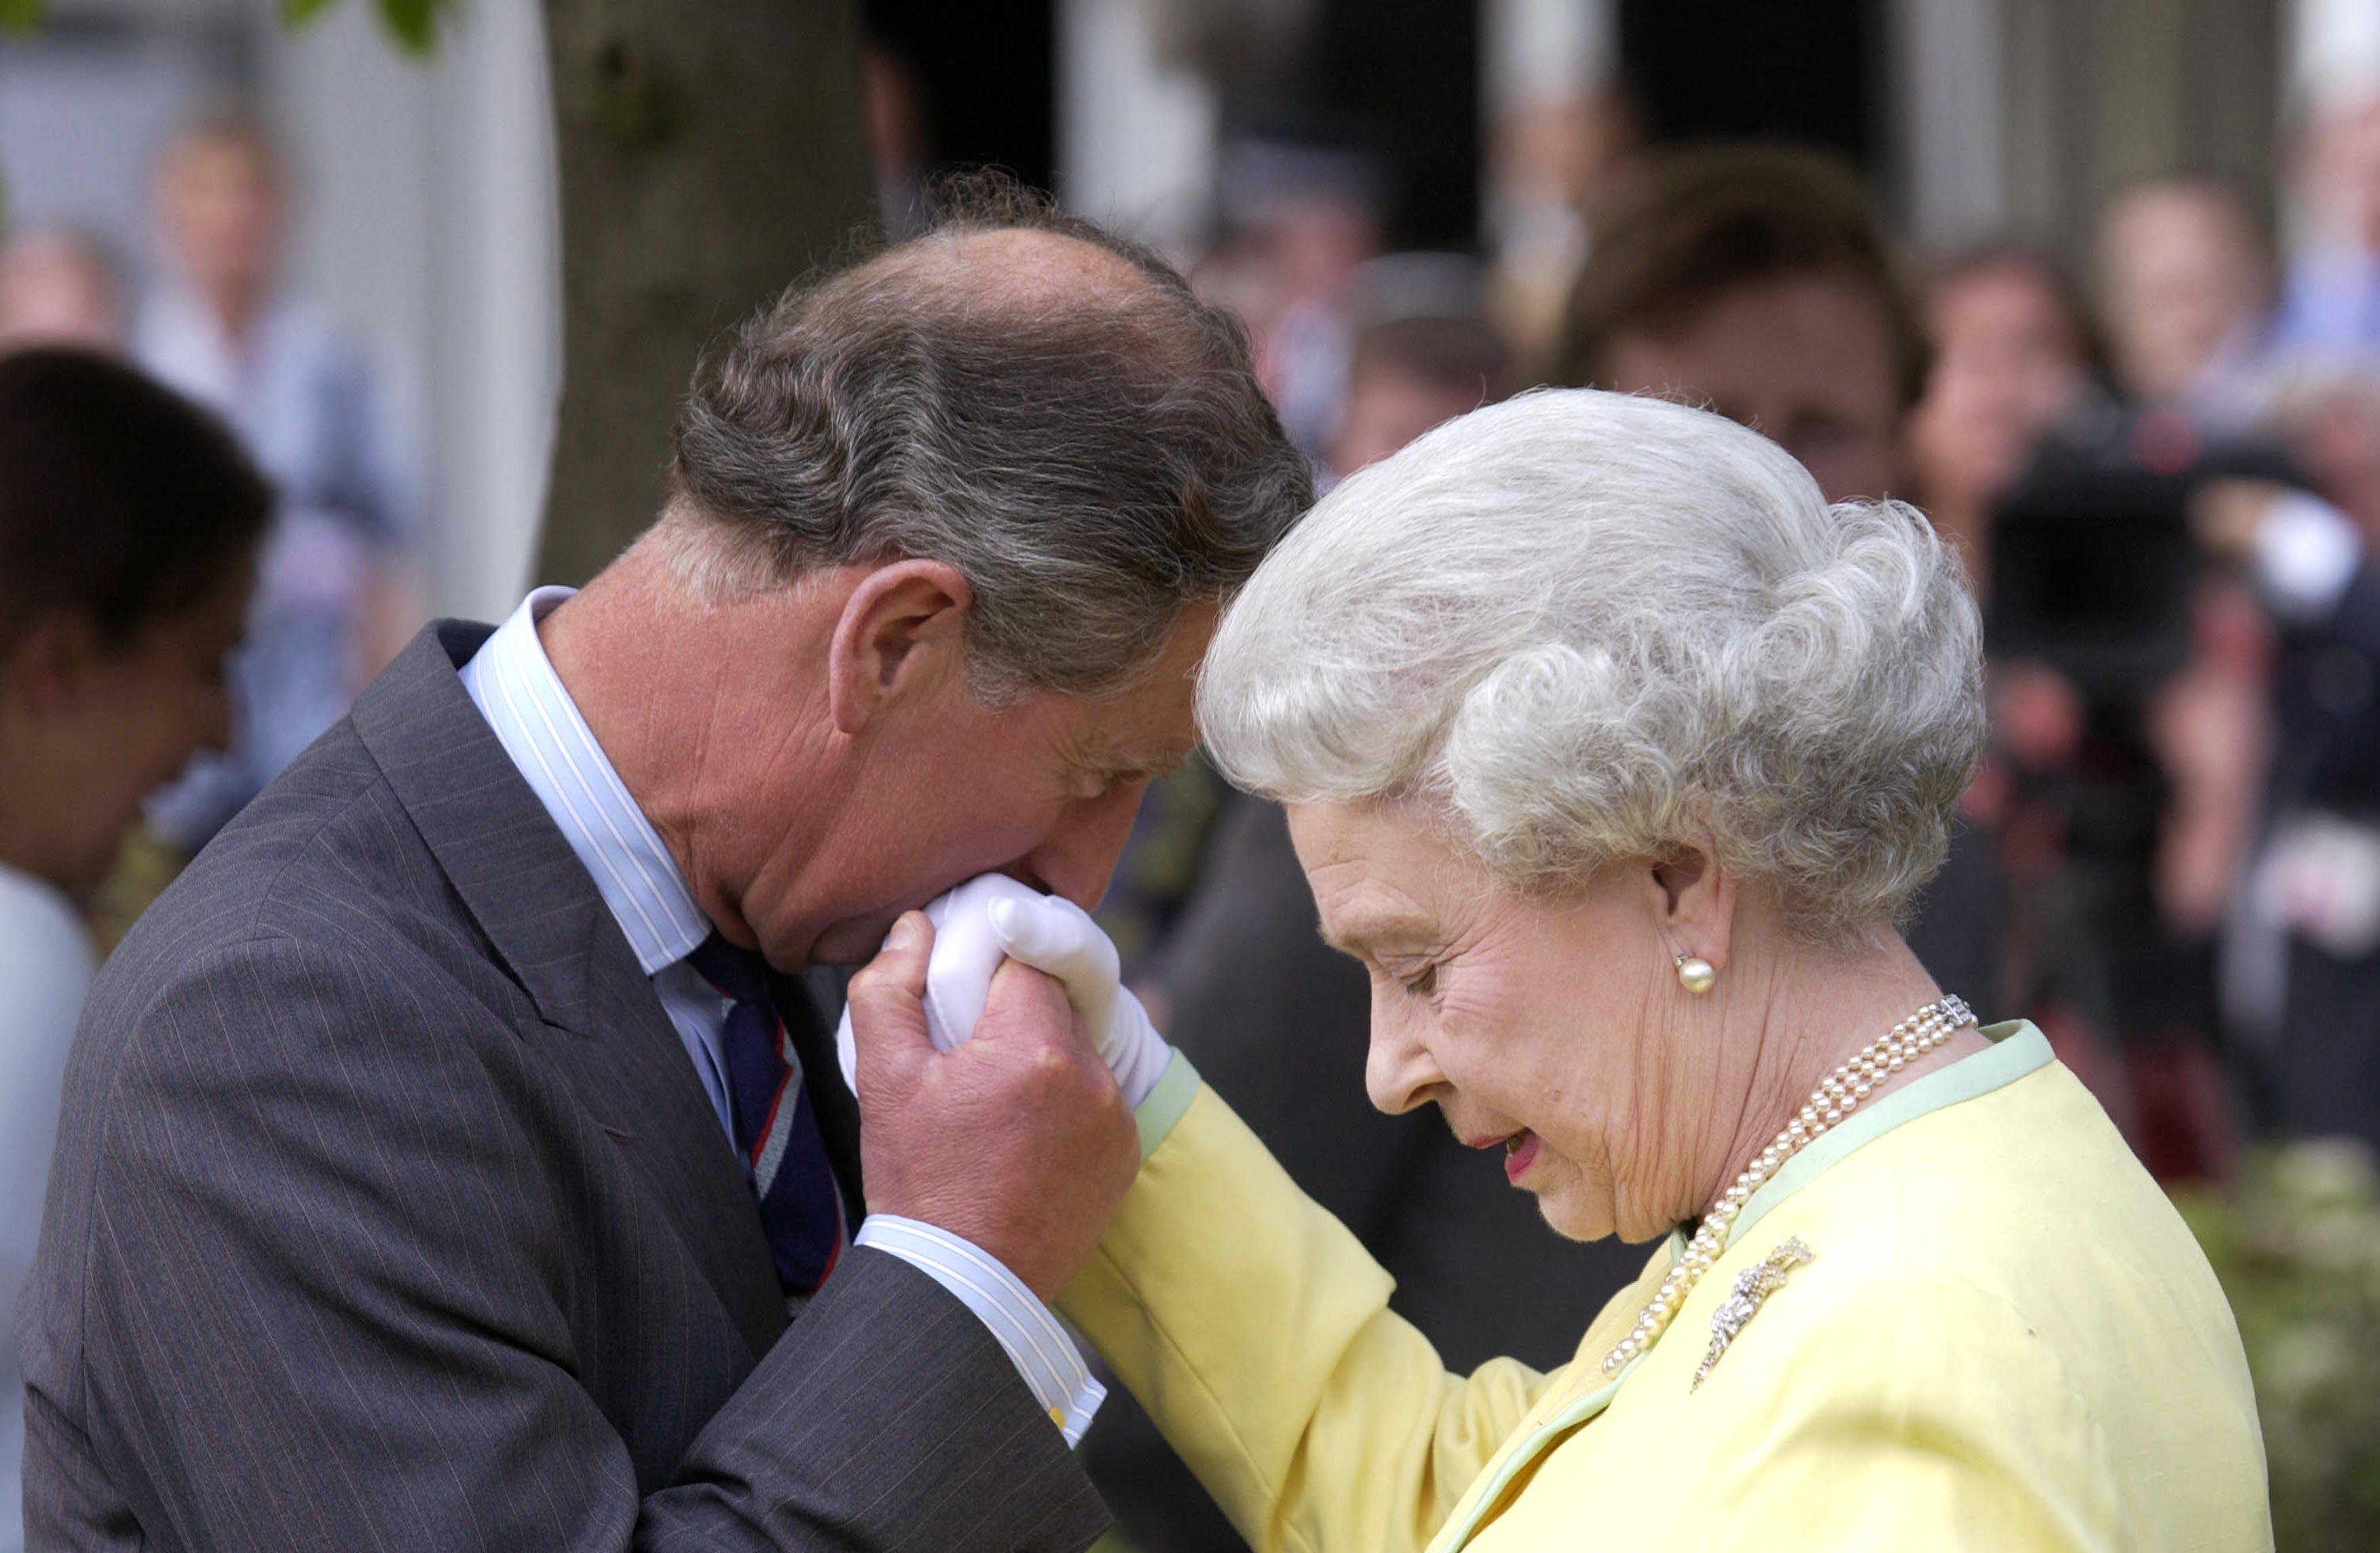 King Charles III, former Prince of Wales, kissing Queen Elizabeth II's hand at the Chelsea Flower Show in 2002 | Source: Getty Images